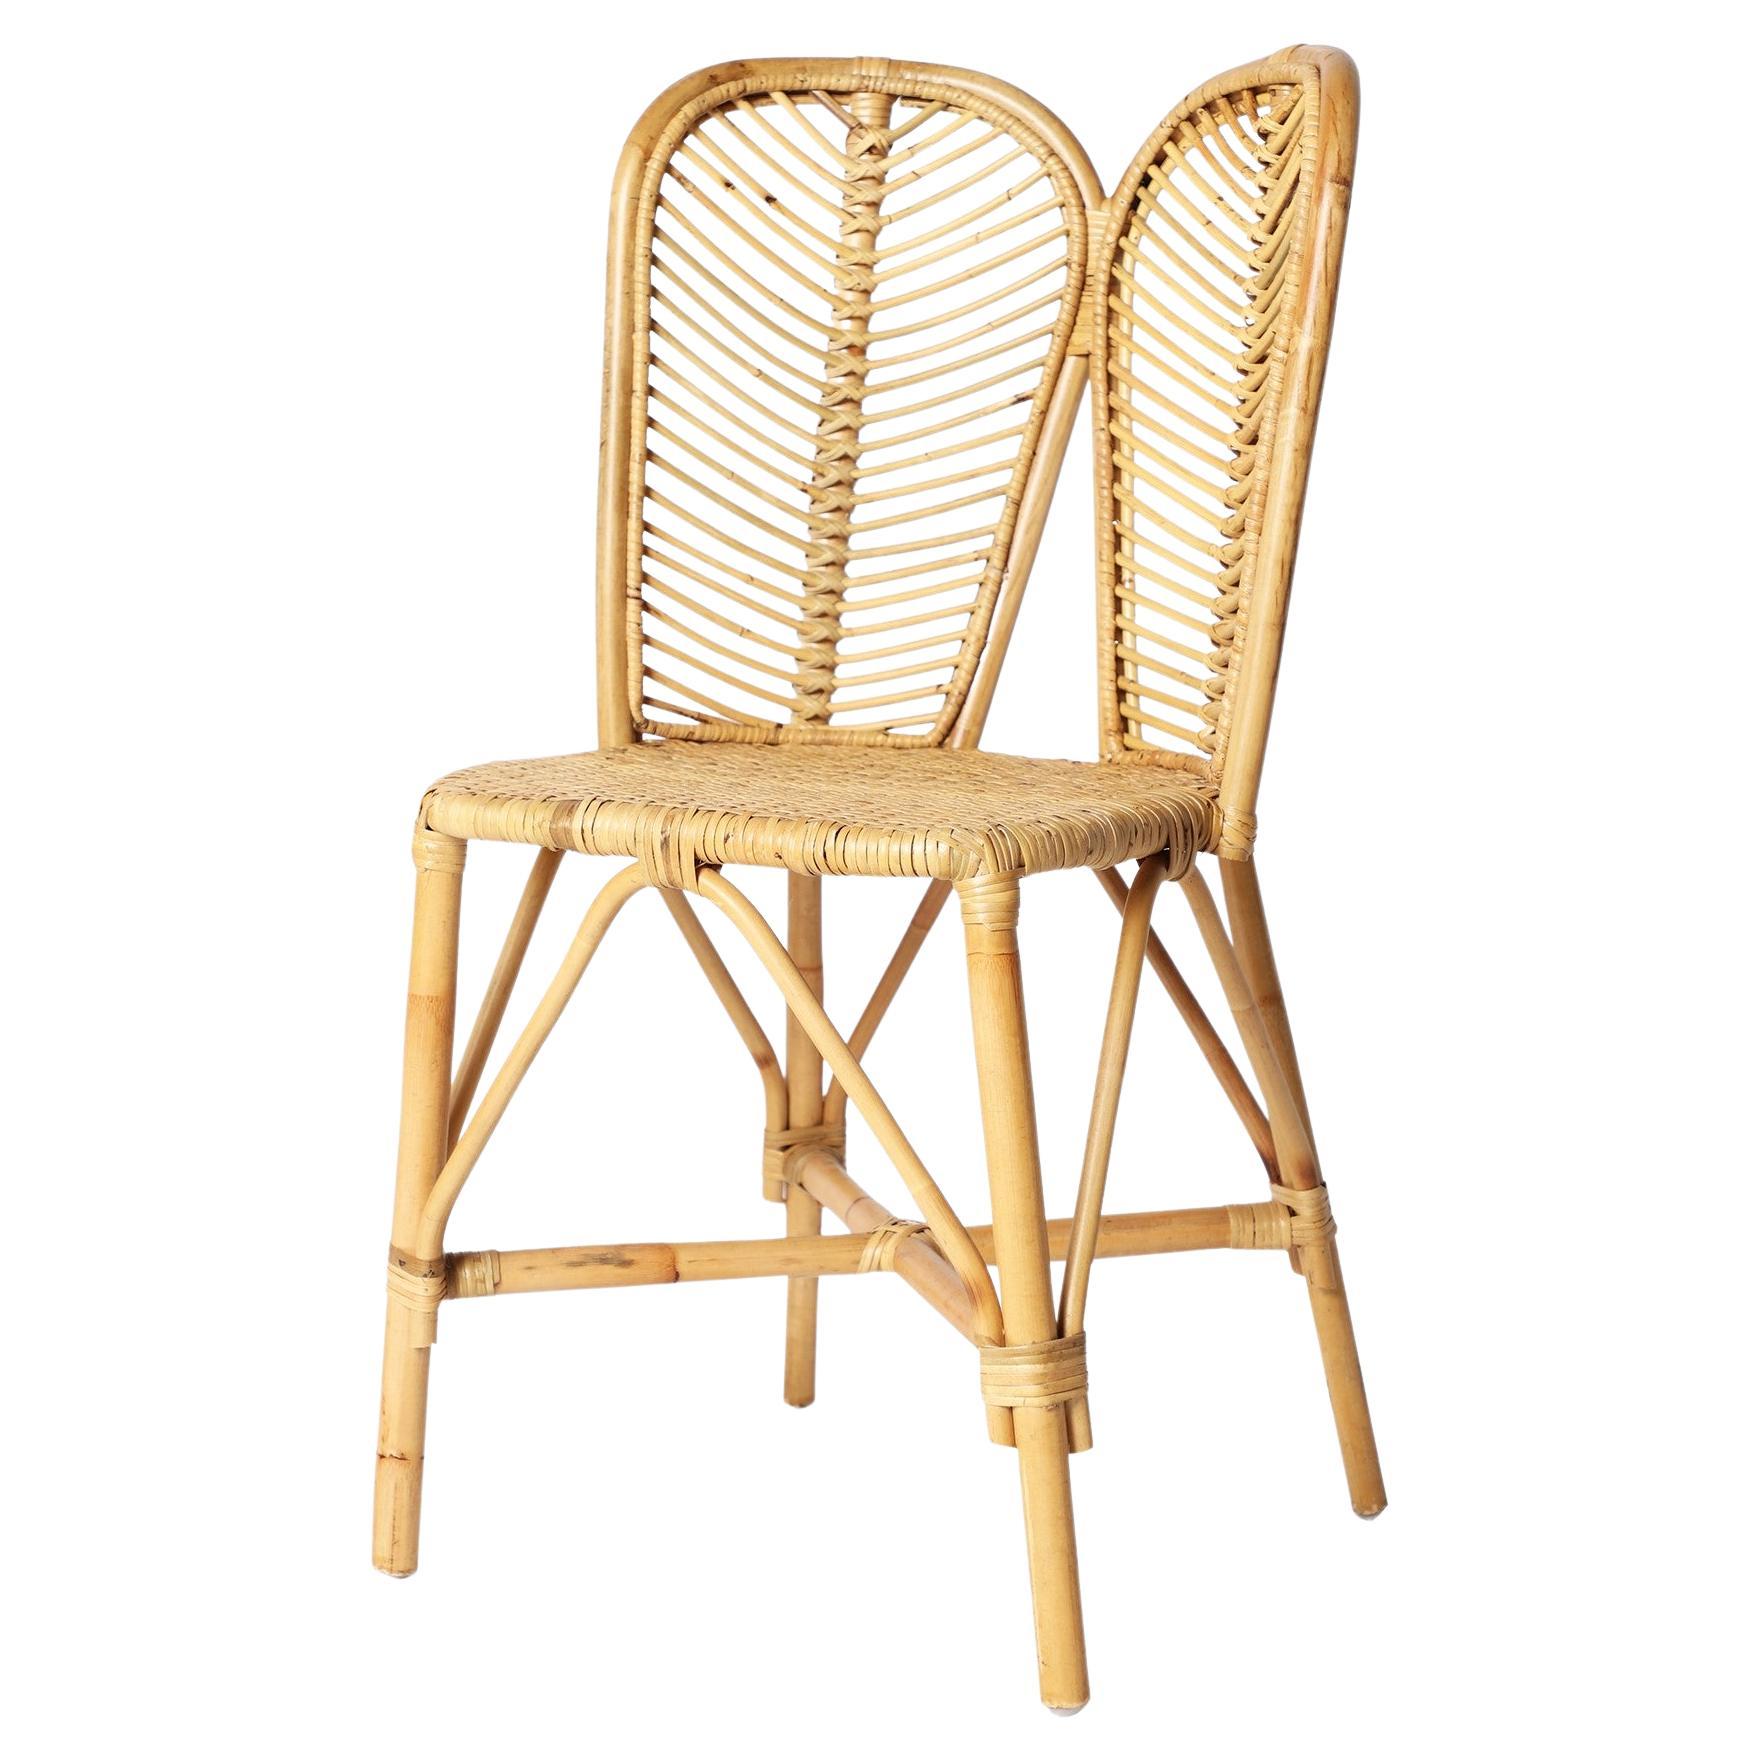 1960s Italian Design Style Handcrafted Rattan And Wicker Seat Chair en vente